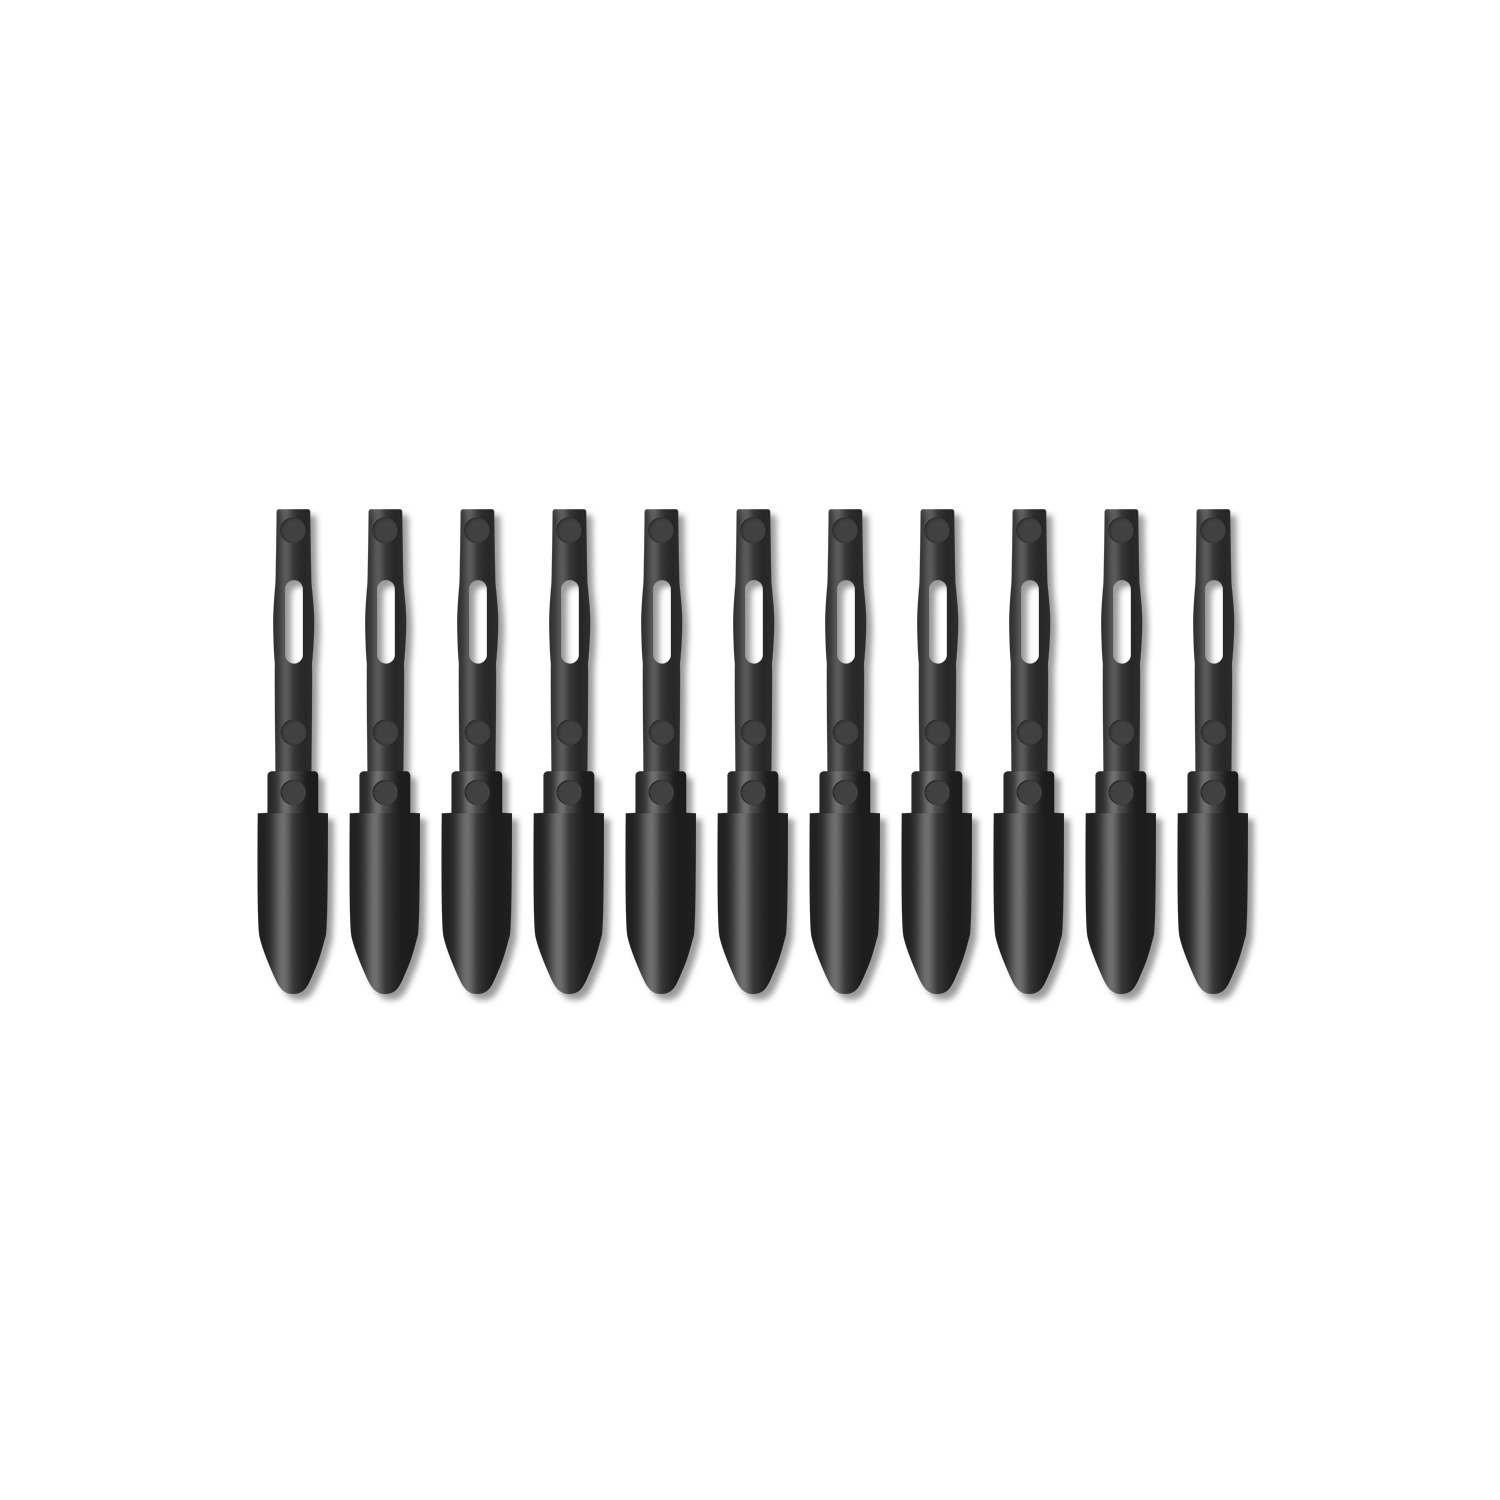 PN04 10pcs Replacement Nibs Pen Tips Compatible with PW100/PW201 Graphics Drawing Tablet Stylus Black 